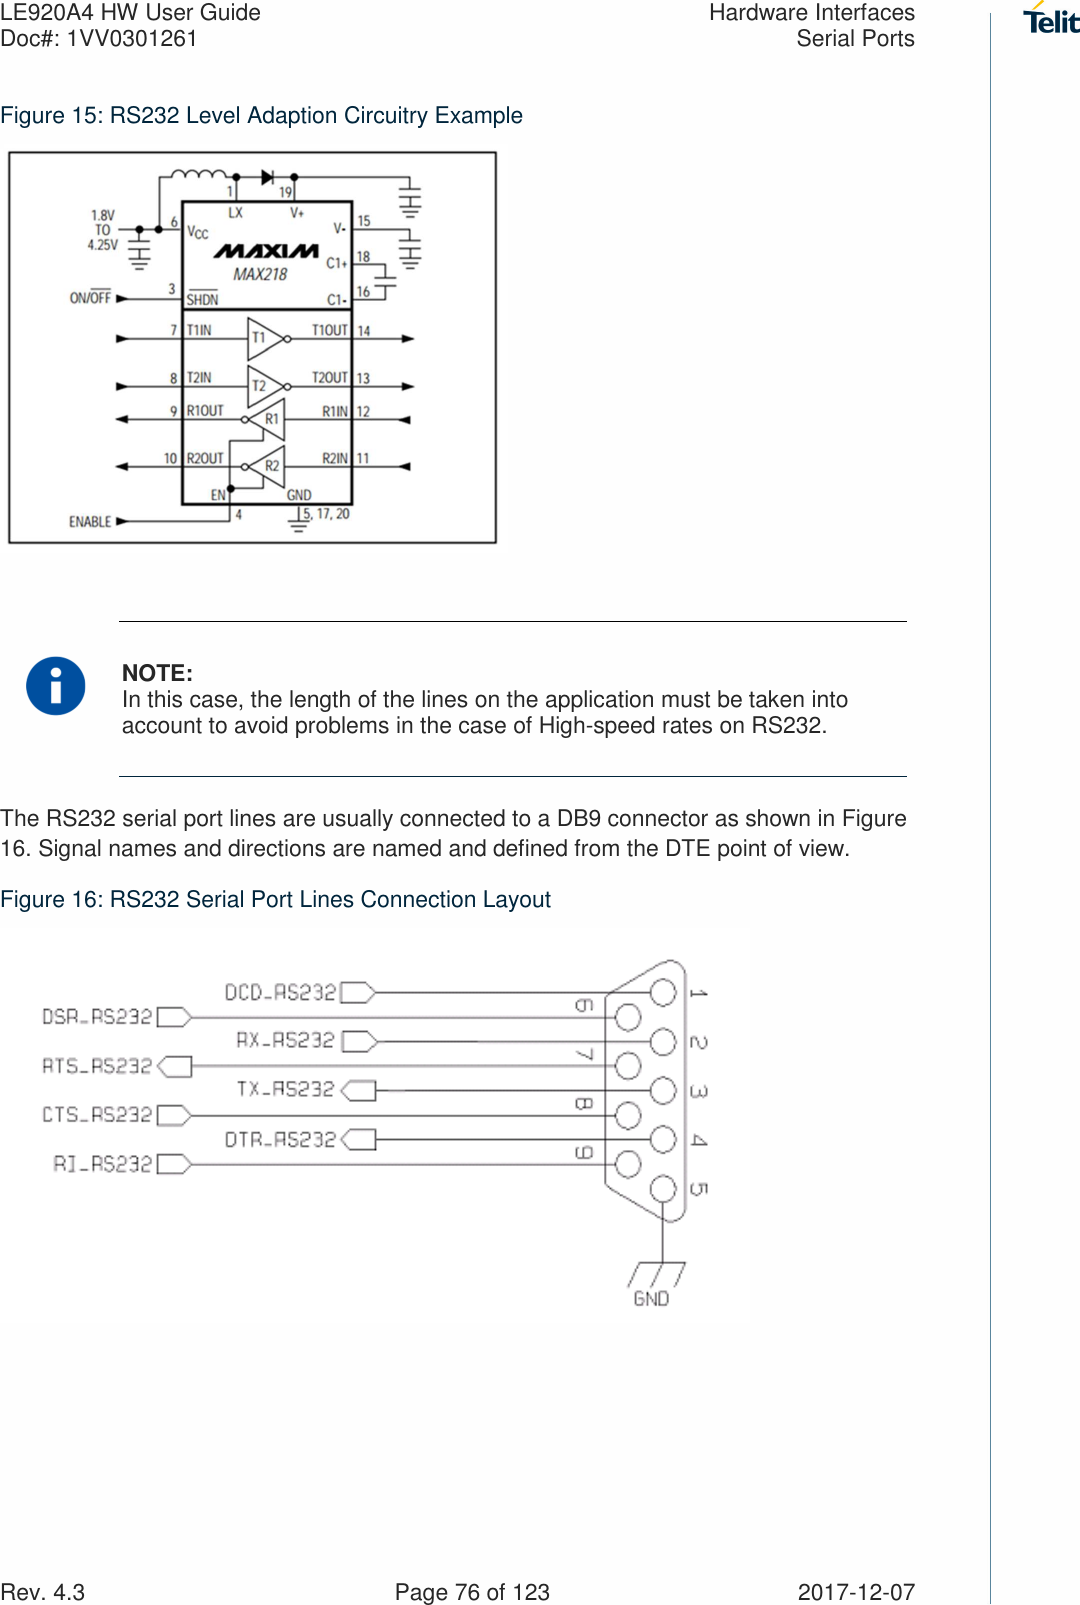 LE920A4 HW User Guide  Hardware Interfaces Doc#: 1VV0301261  Serial Ports Rev. 4.3    Page 76 of 123  2017-12-07 Figure 15: RS232 Level Adaption Circuitry Example   NOTE: In this case, the length of the lines on the application must be taken into account to avoid problems in the case of High-speed rates on RS232. The RS232 serial port lines are usually connected to a DB9 connector as shown in Figure 16. Signal names and directions are named and defined from the DTE point of view. Figure 16: RS232 Serial Port Lines Connection Layout     